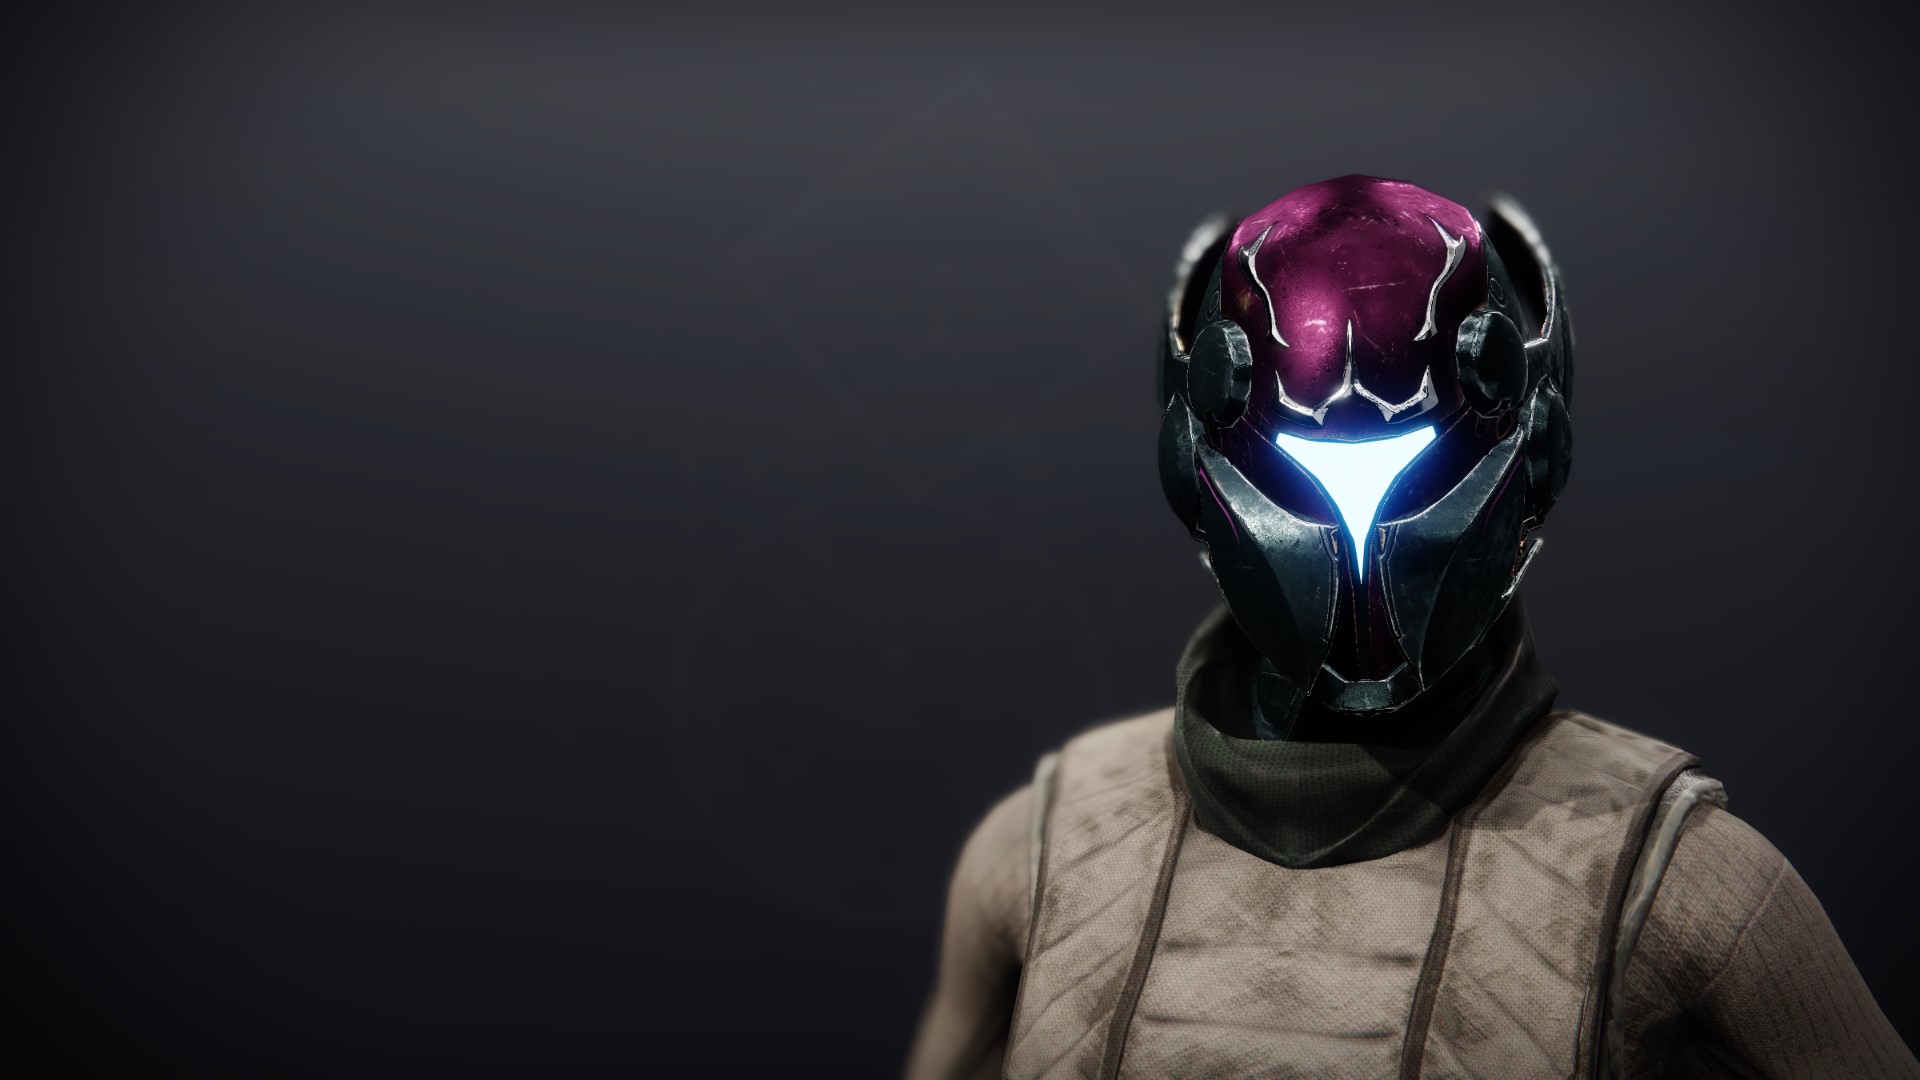 An in-game render of the Pathfinder's Visor.